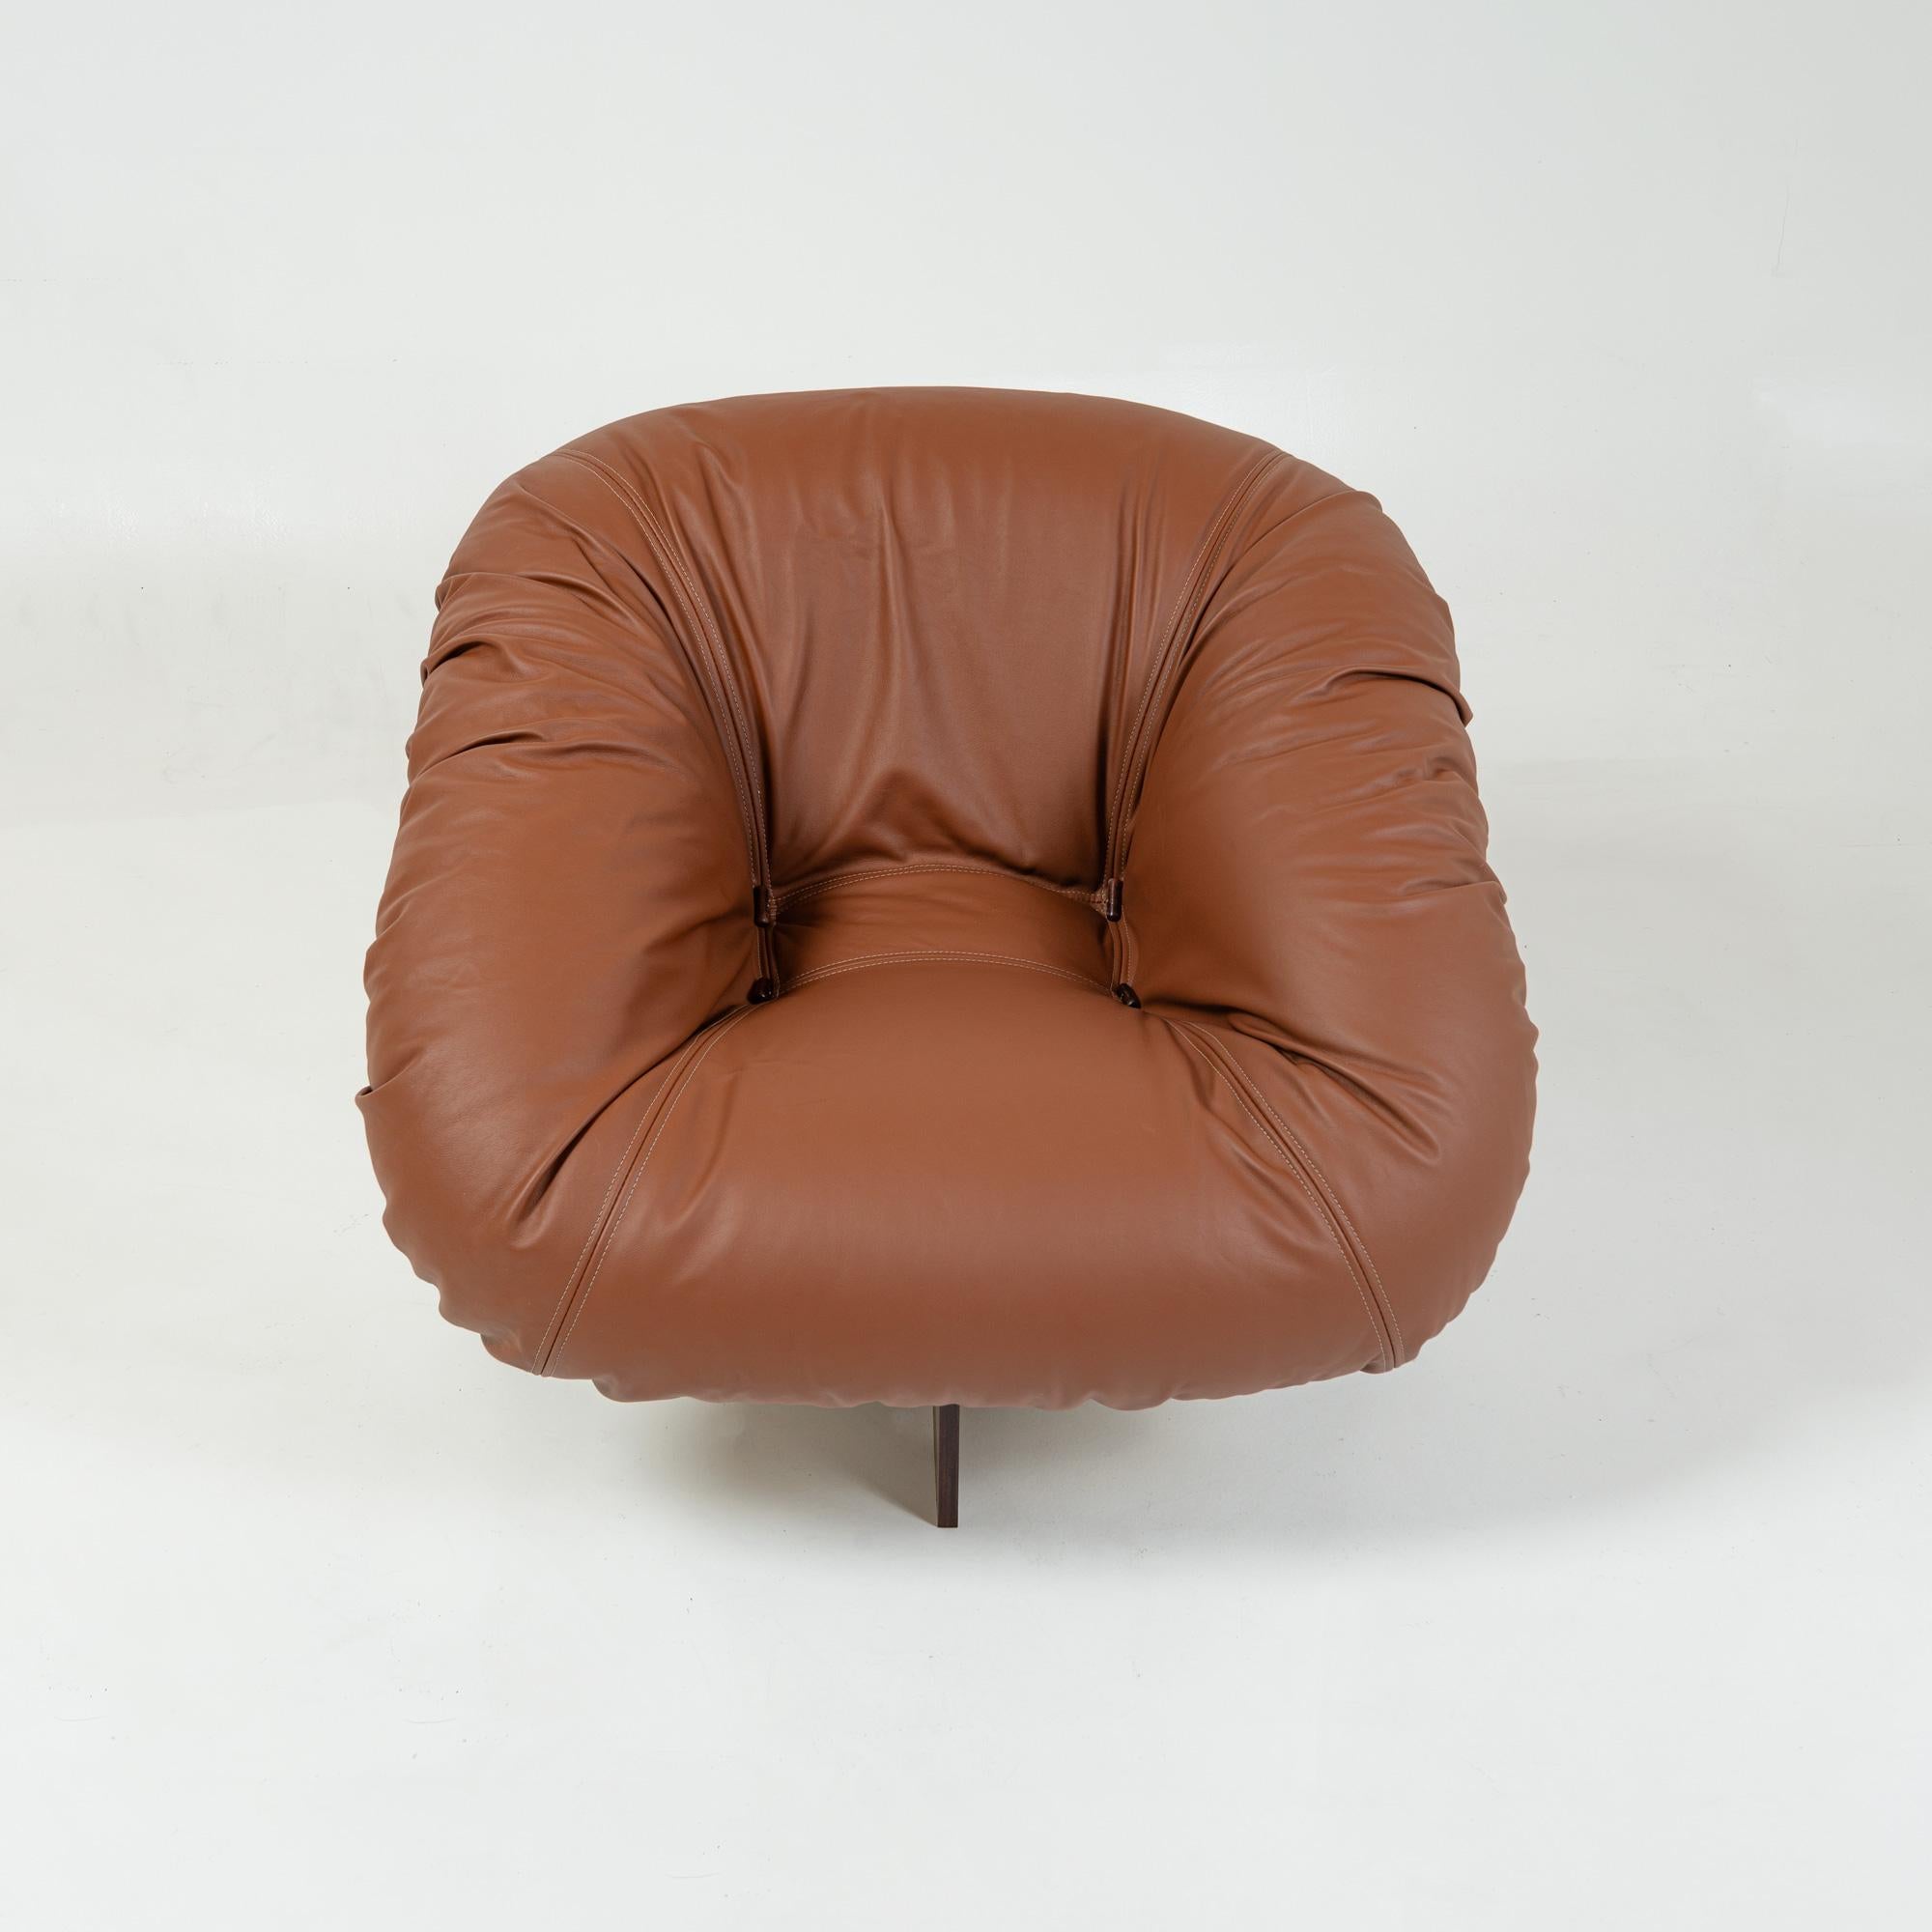 Percival Lafer's Lounge Chair model MP-61 in Maharam Leather and Rosewood, 1973 For Sale 2